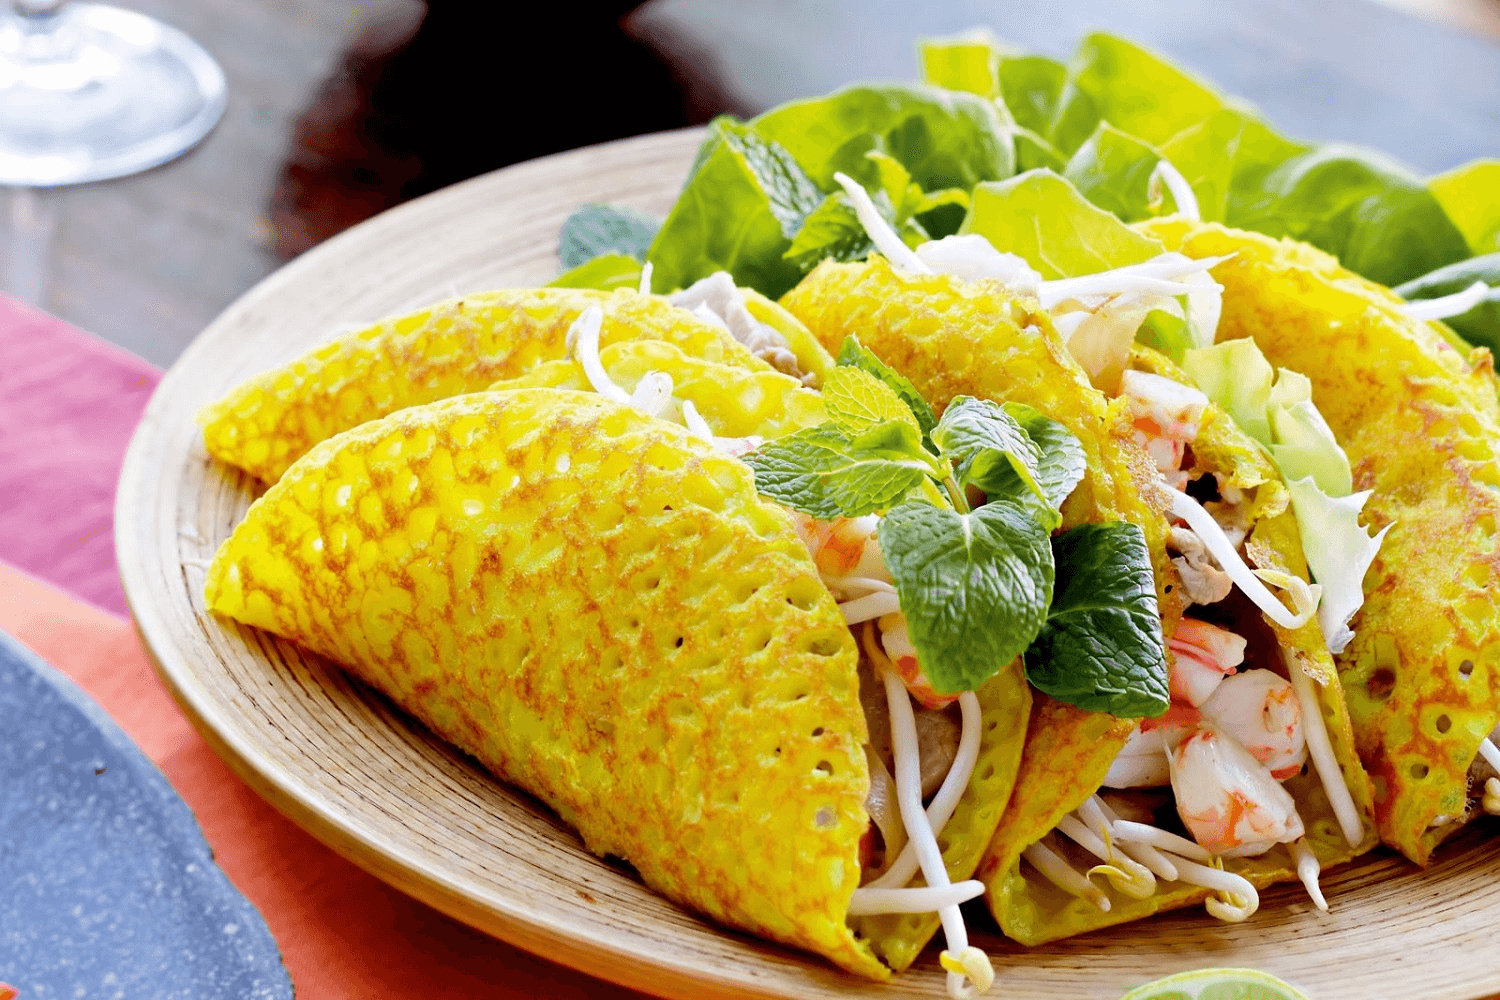 Best Local Dishes in Hue: Banh Khoai (Vietnamese crepe)